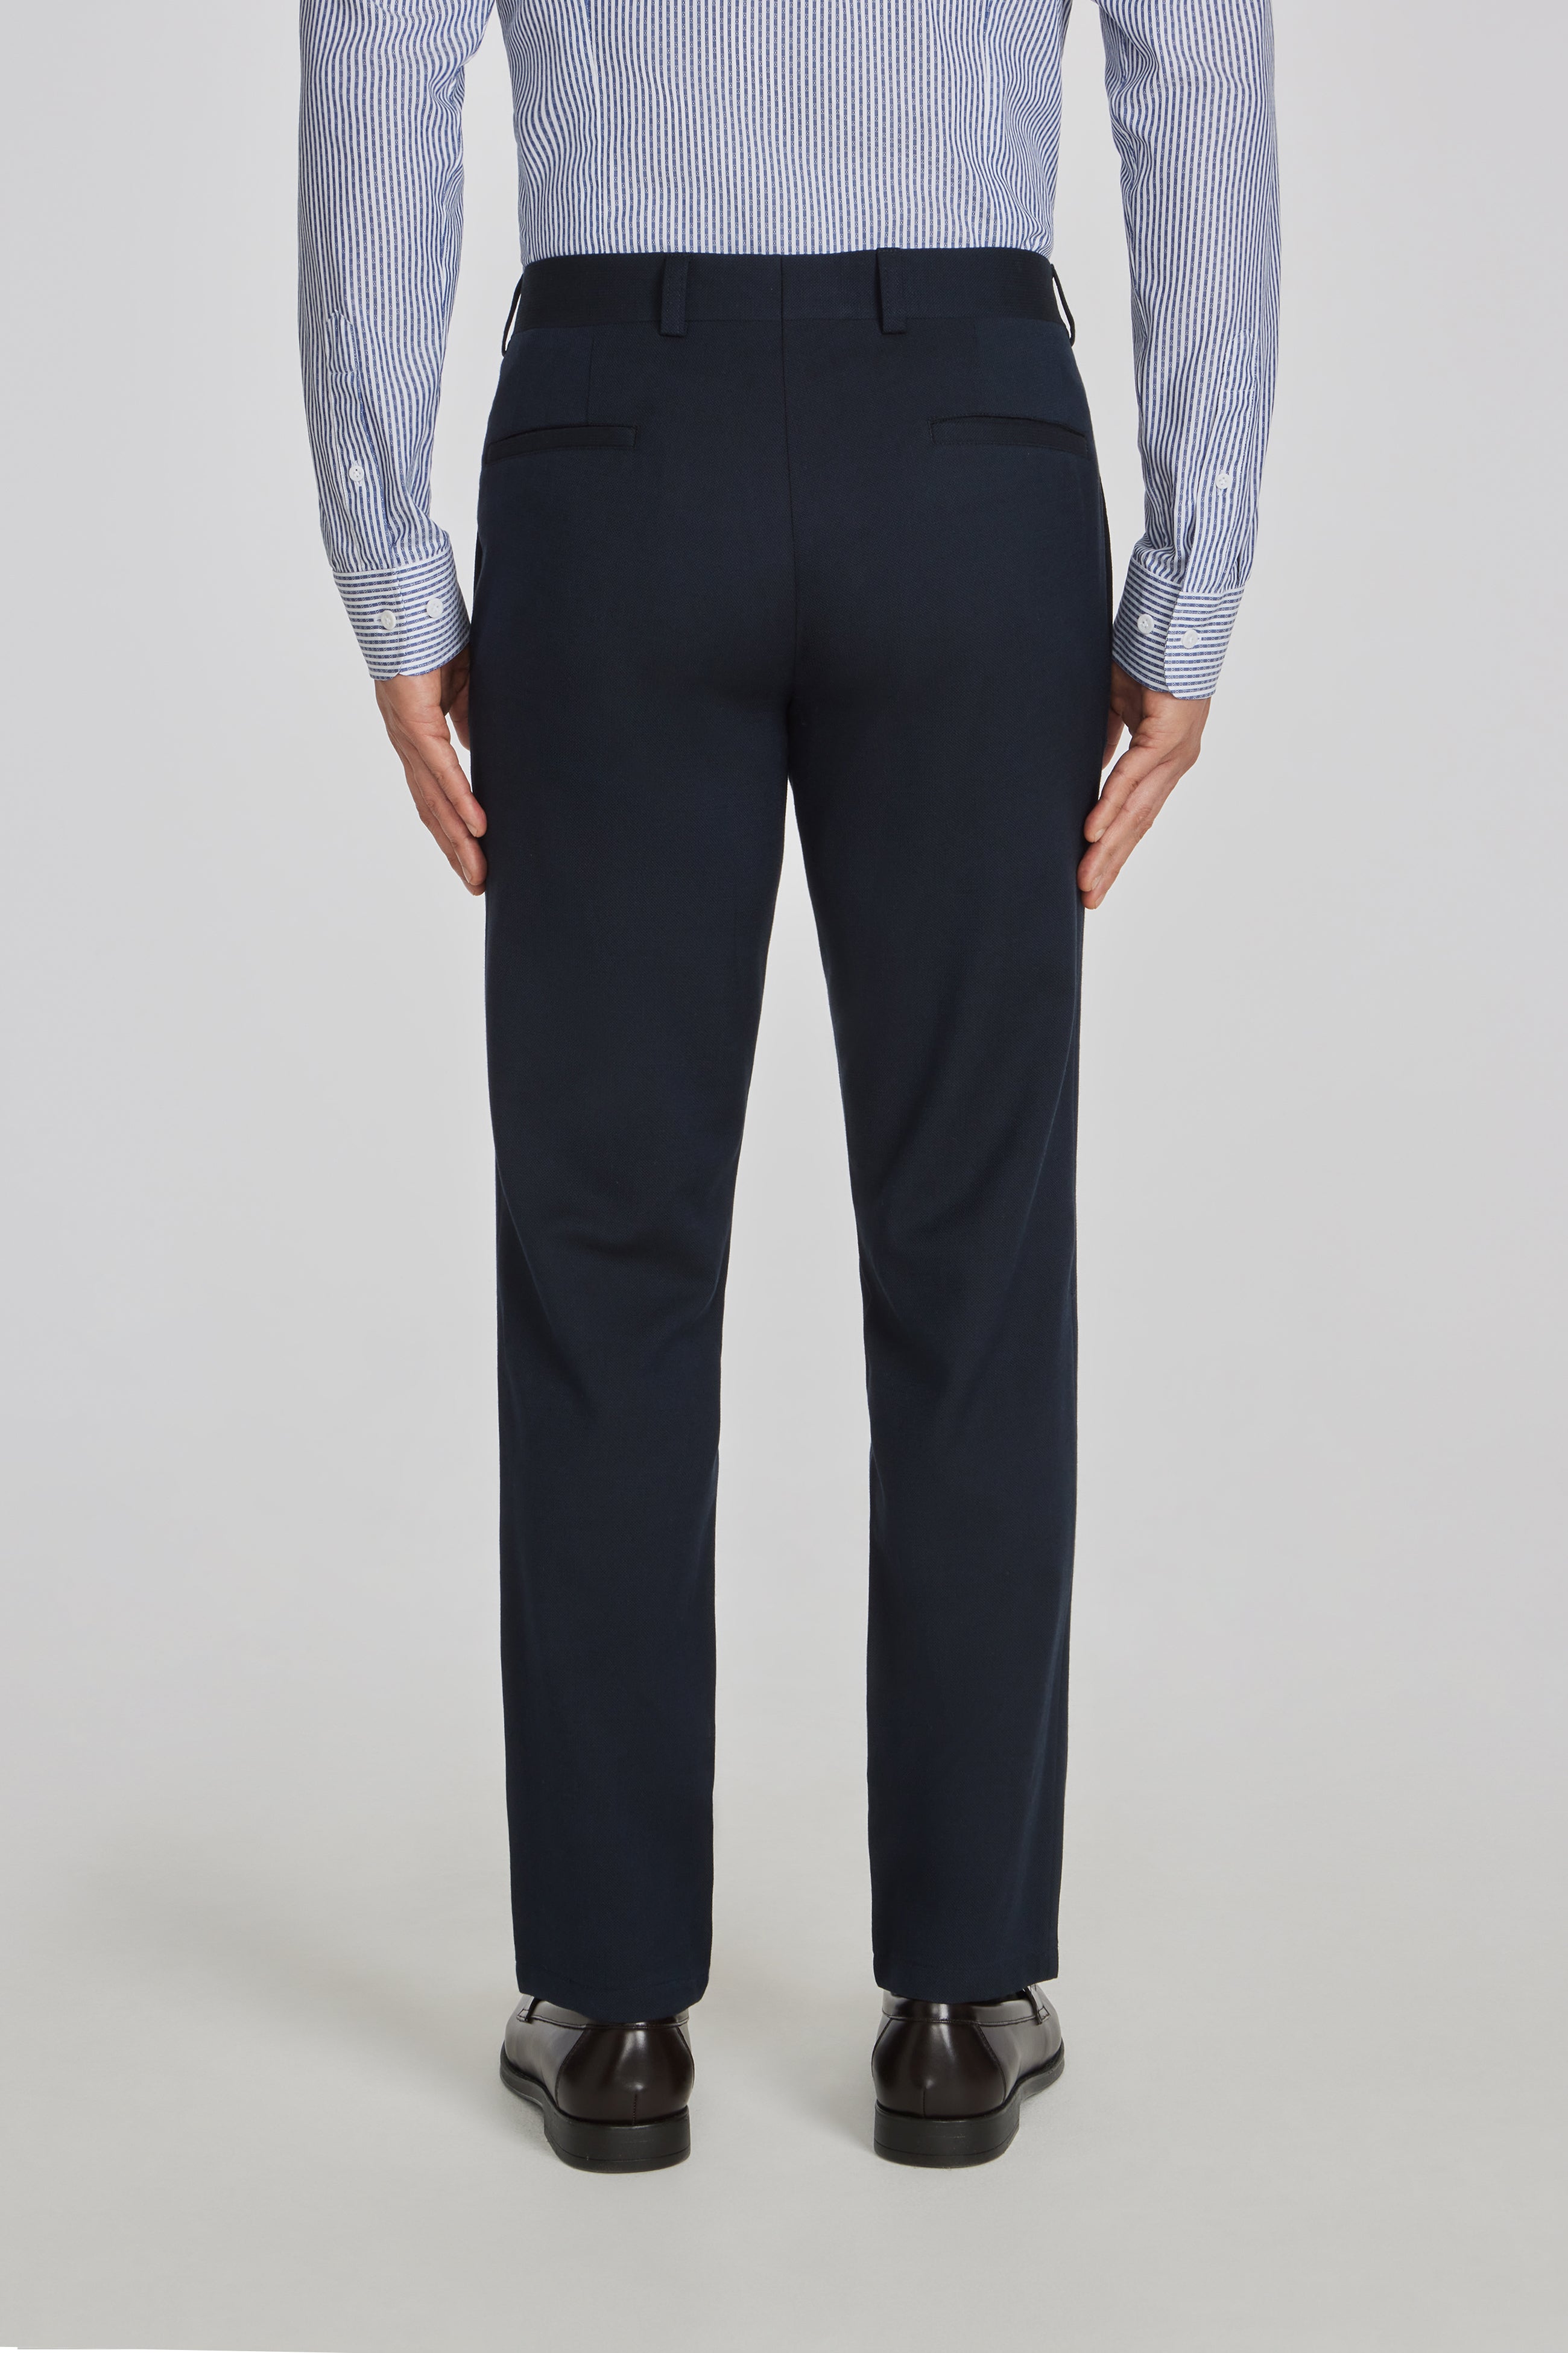 Image of Palmer Textured Cotton, Wool Stretch Trouser in Navy-Jack Victor